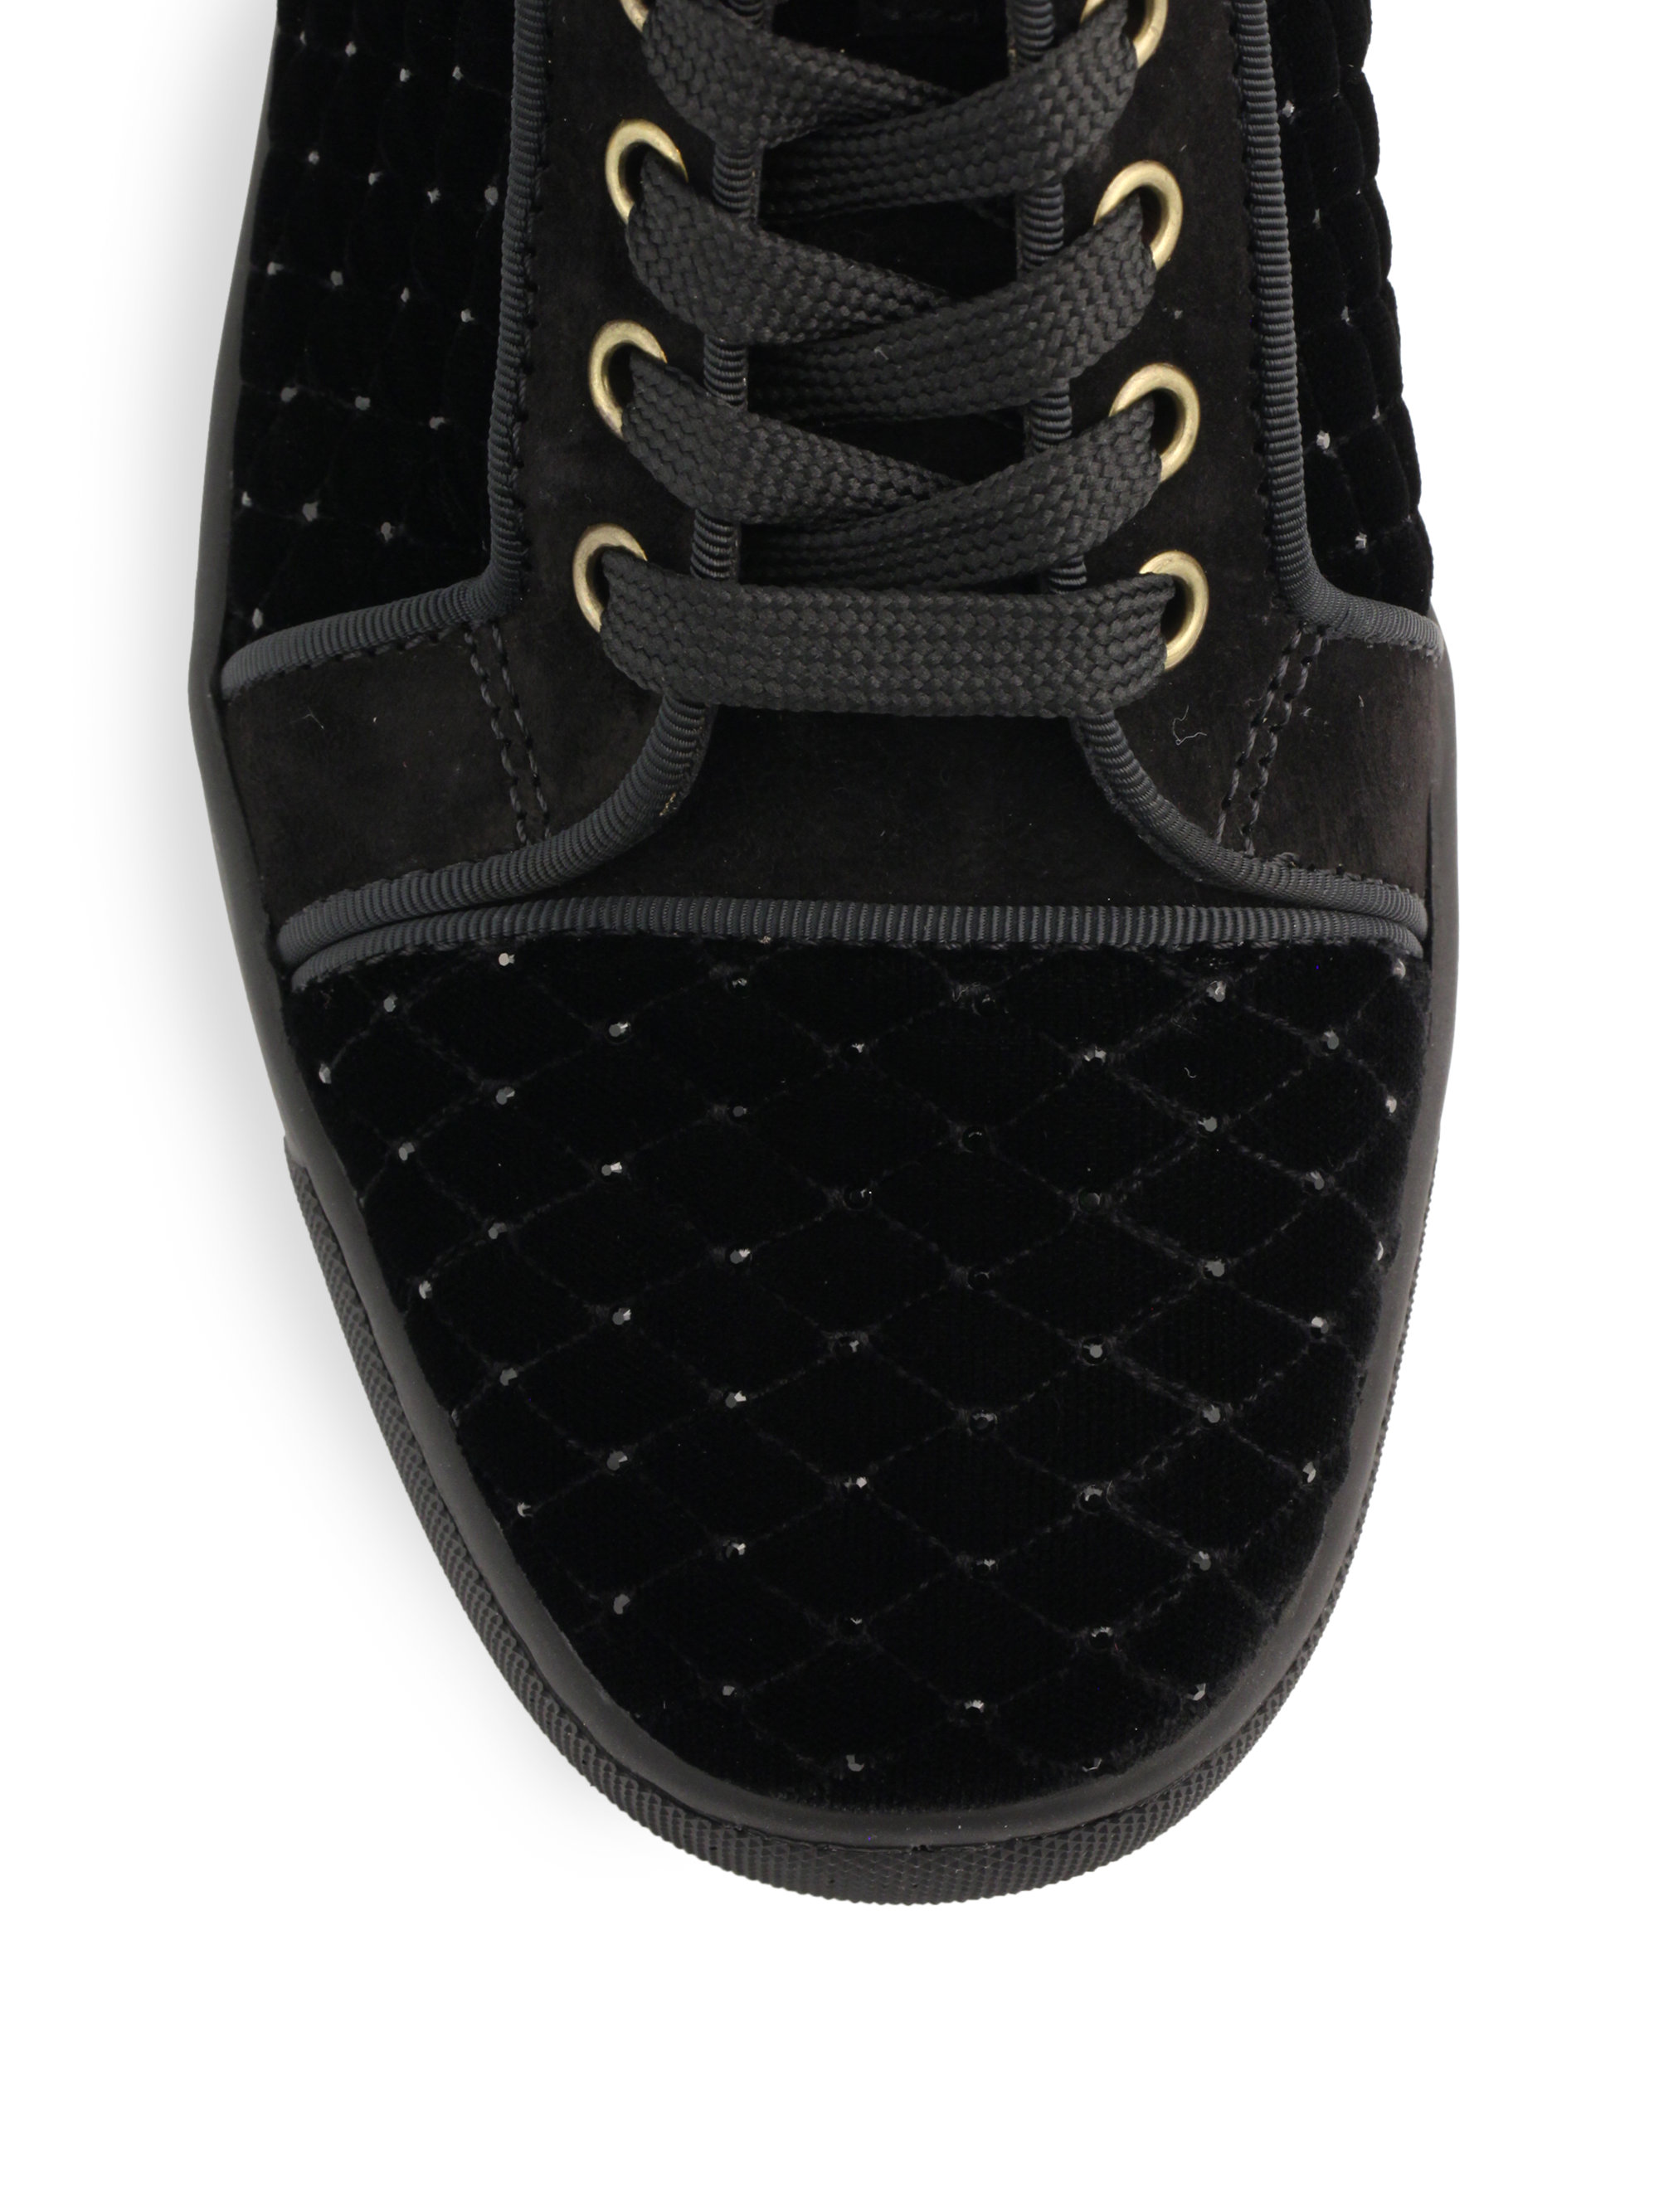 Christian louboutin Jeweled Velvet Suede Laceup Sneakers in Black ...  